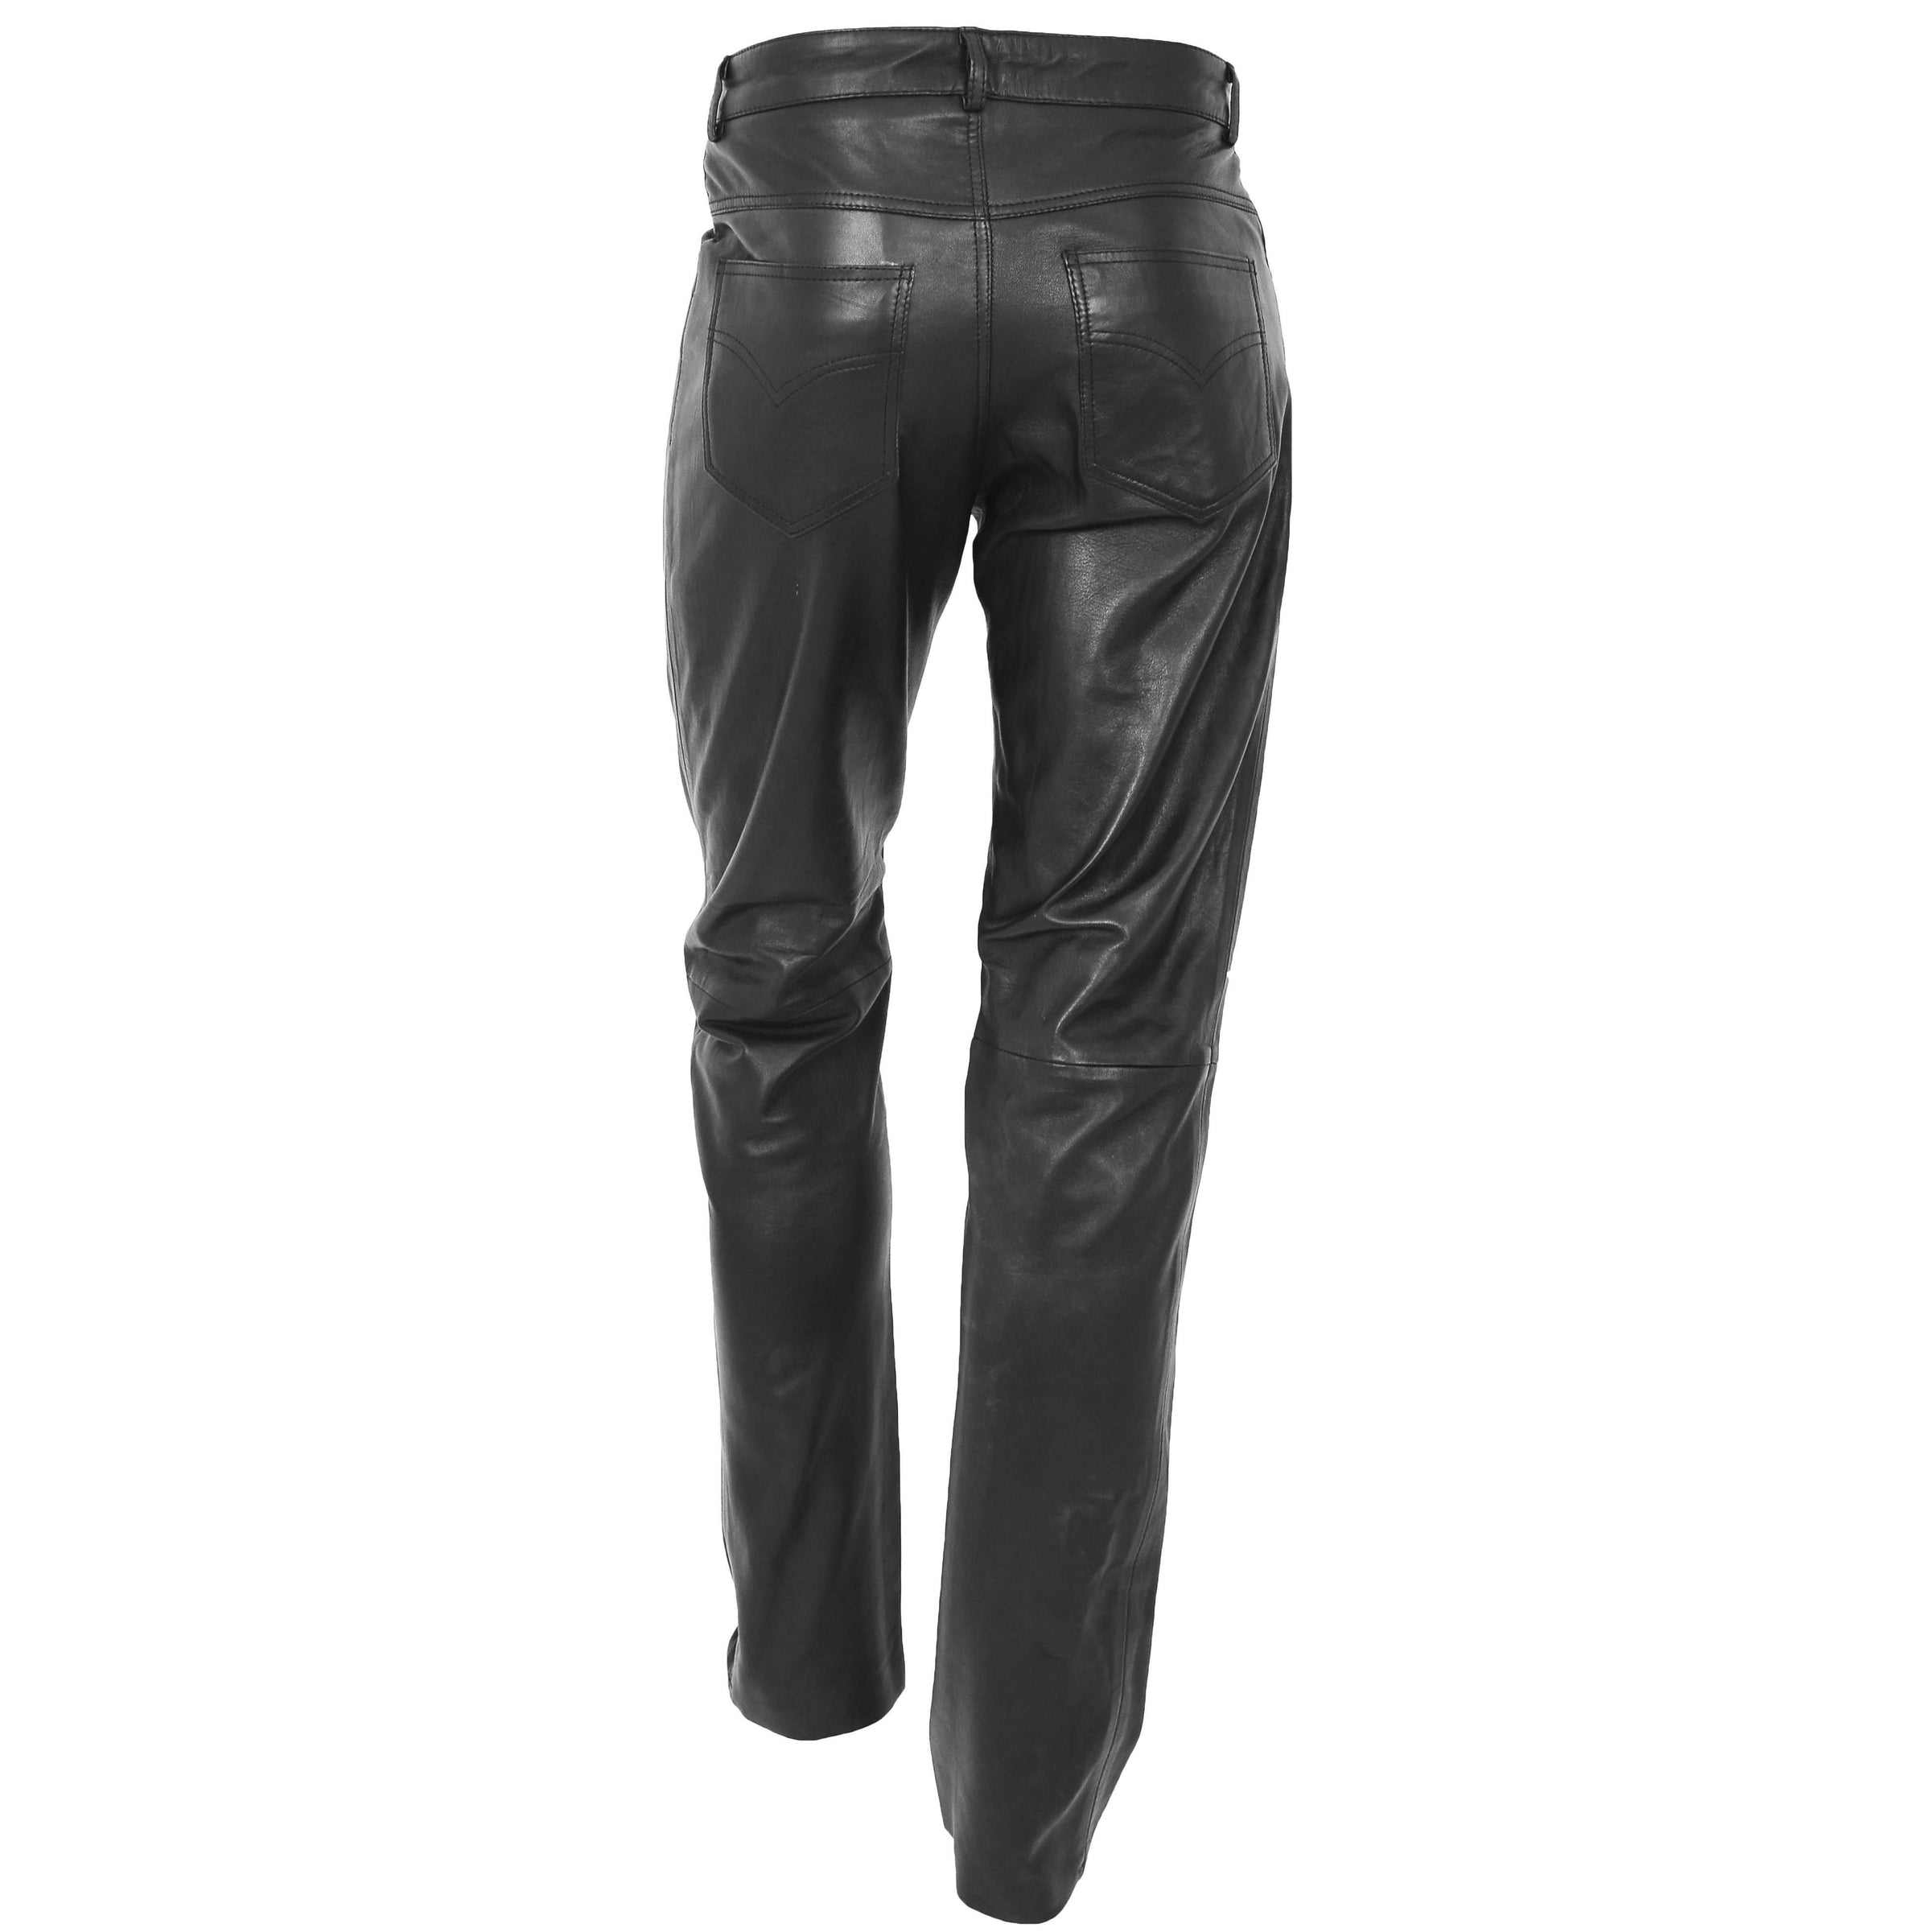 Sleek Sophistication: Men's Fashion Slim Fit Genuine Black Leather Pant |  Free Shipping Included